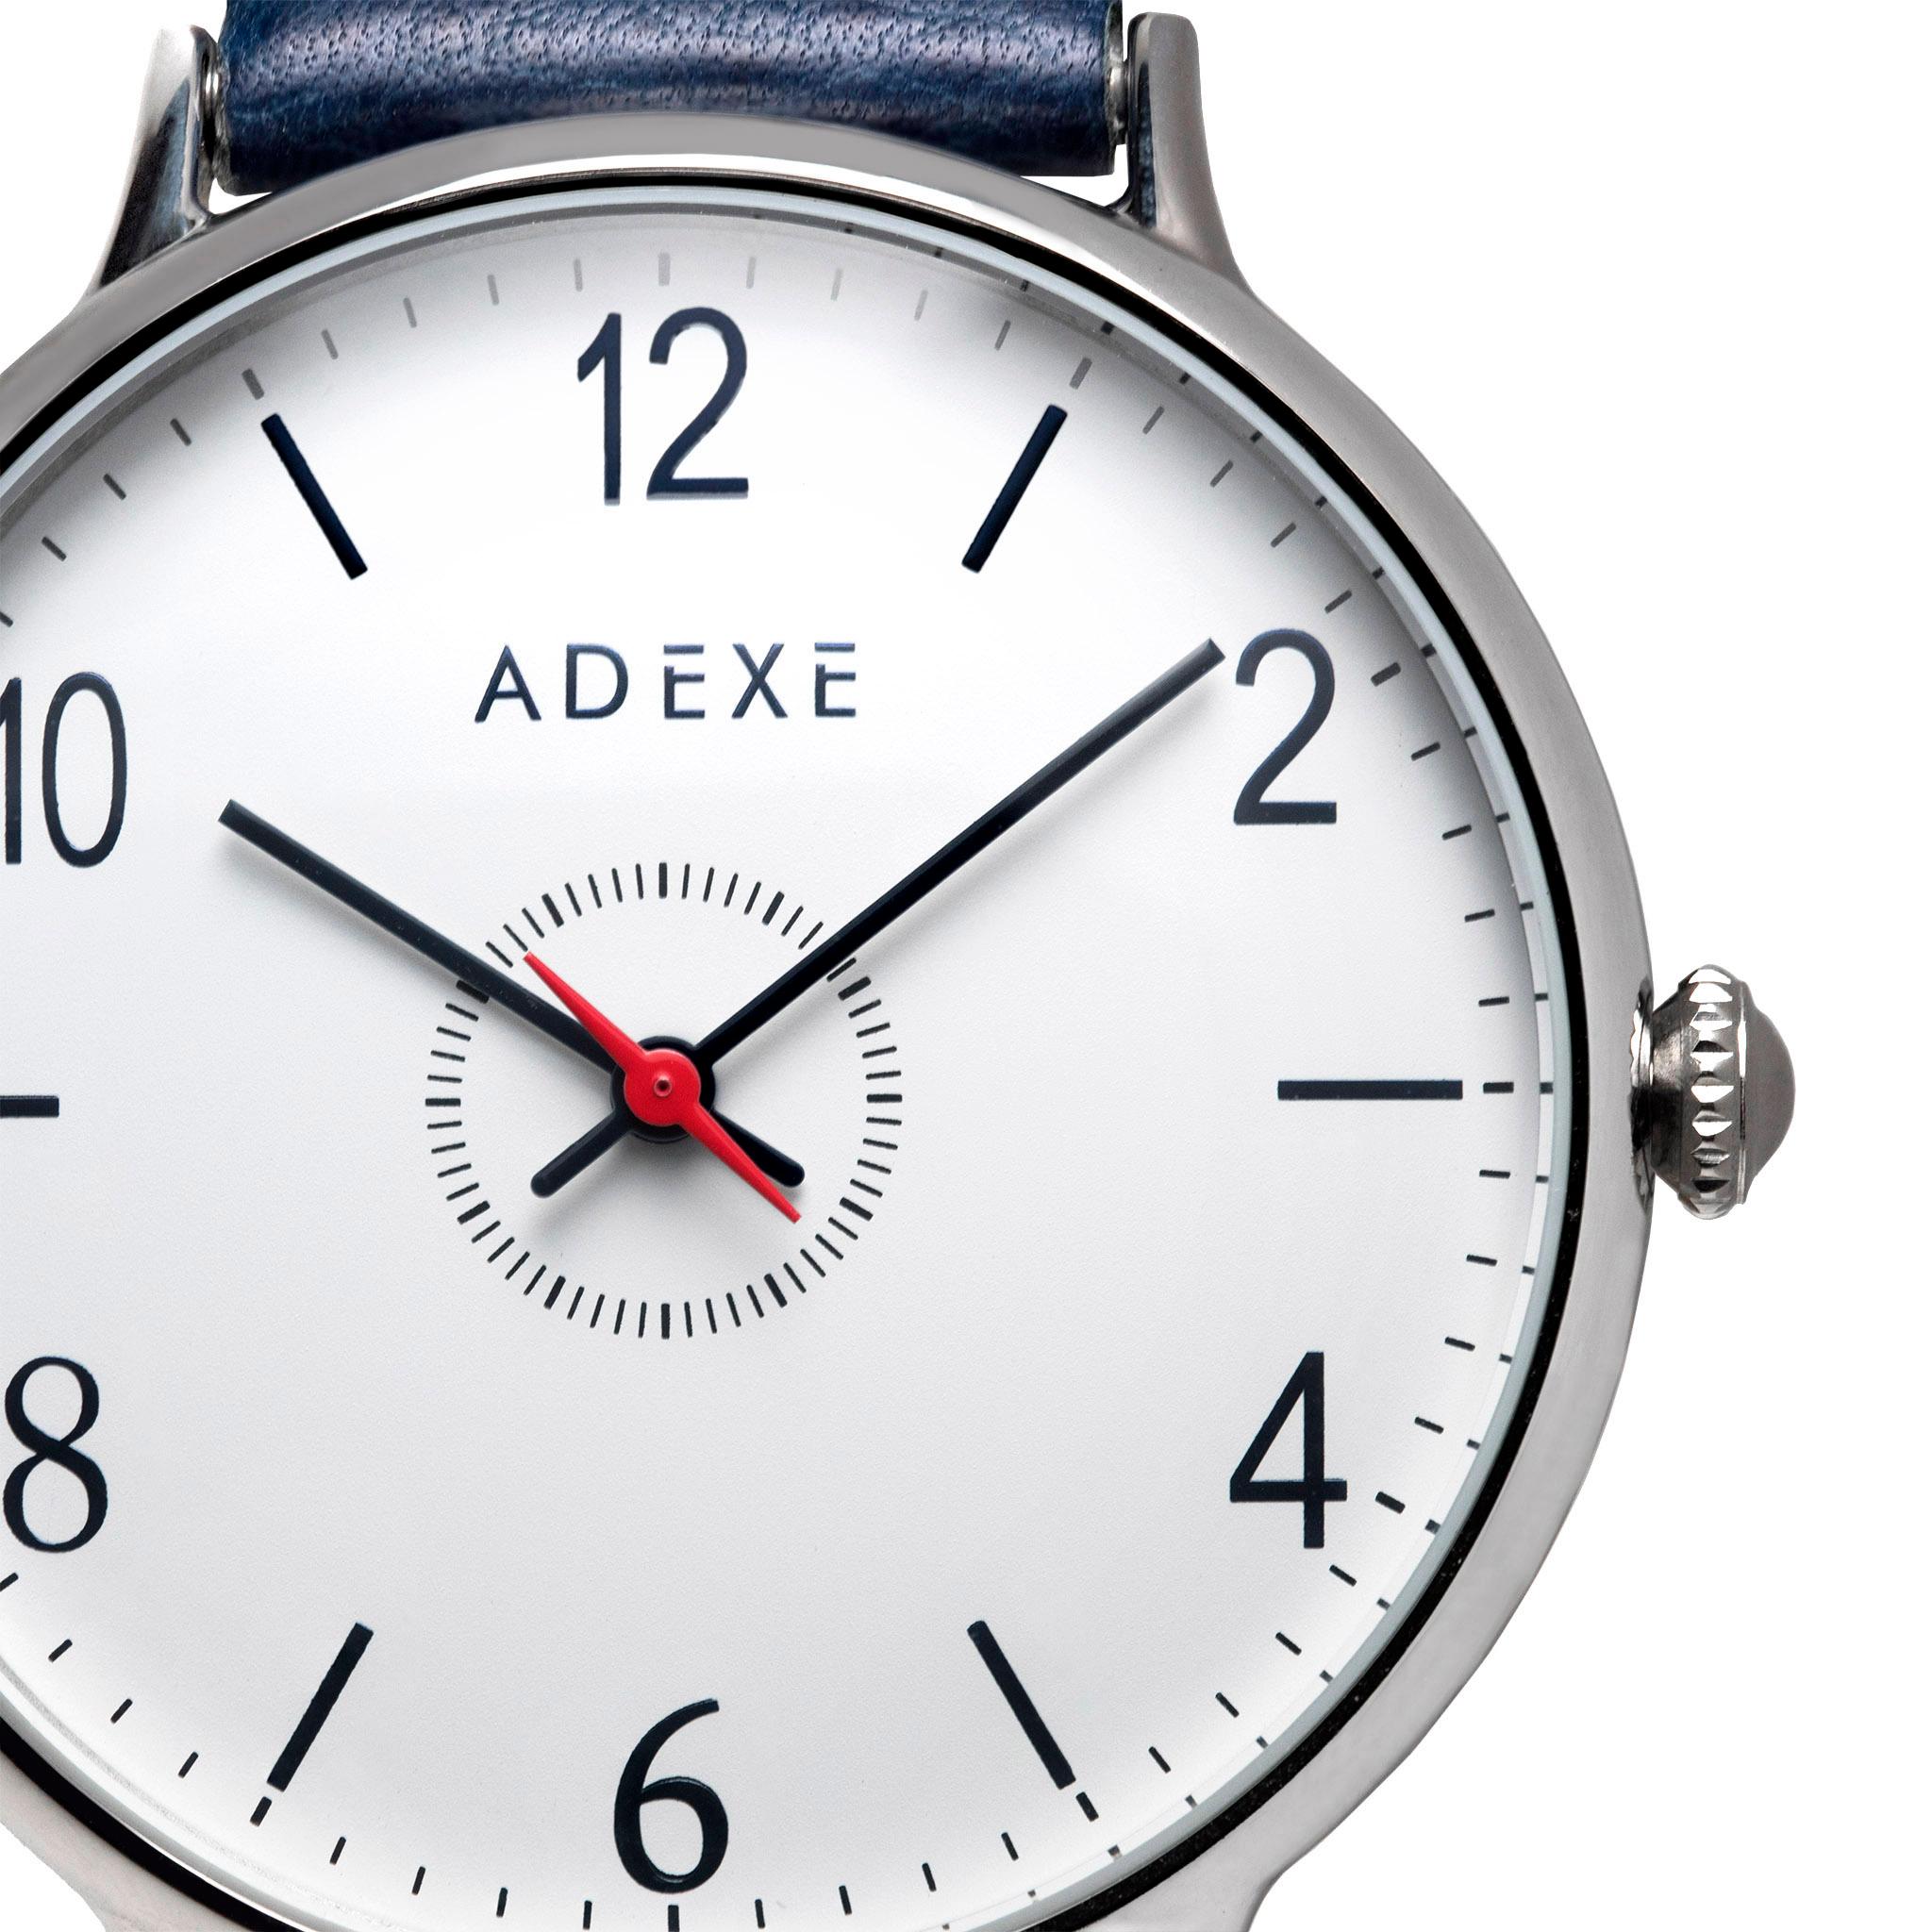 Artist Adexe British Design Number Blue White Silver Stainless Quartz Wristwatch For Sale